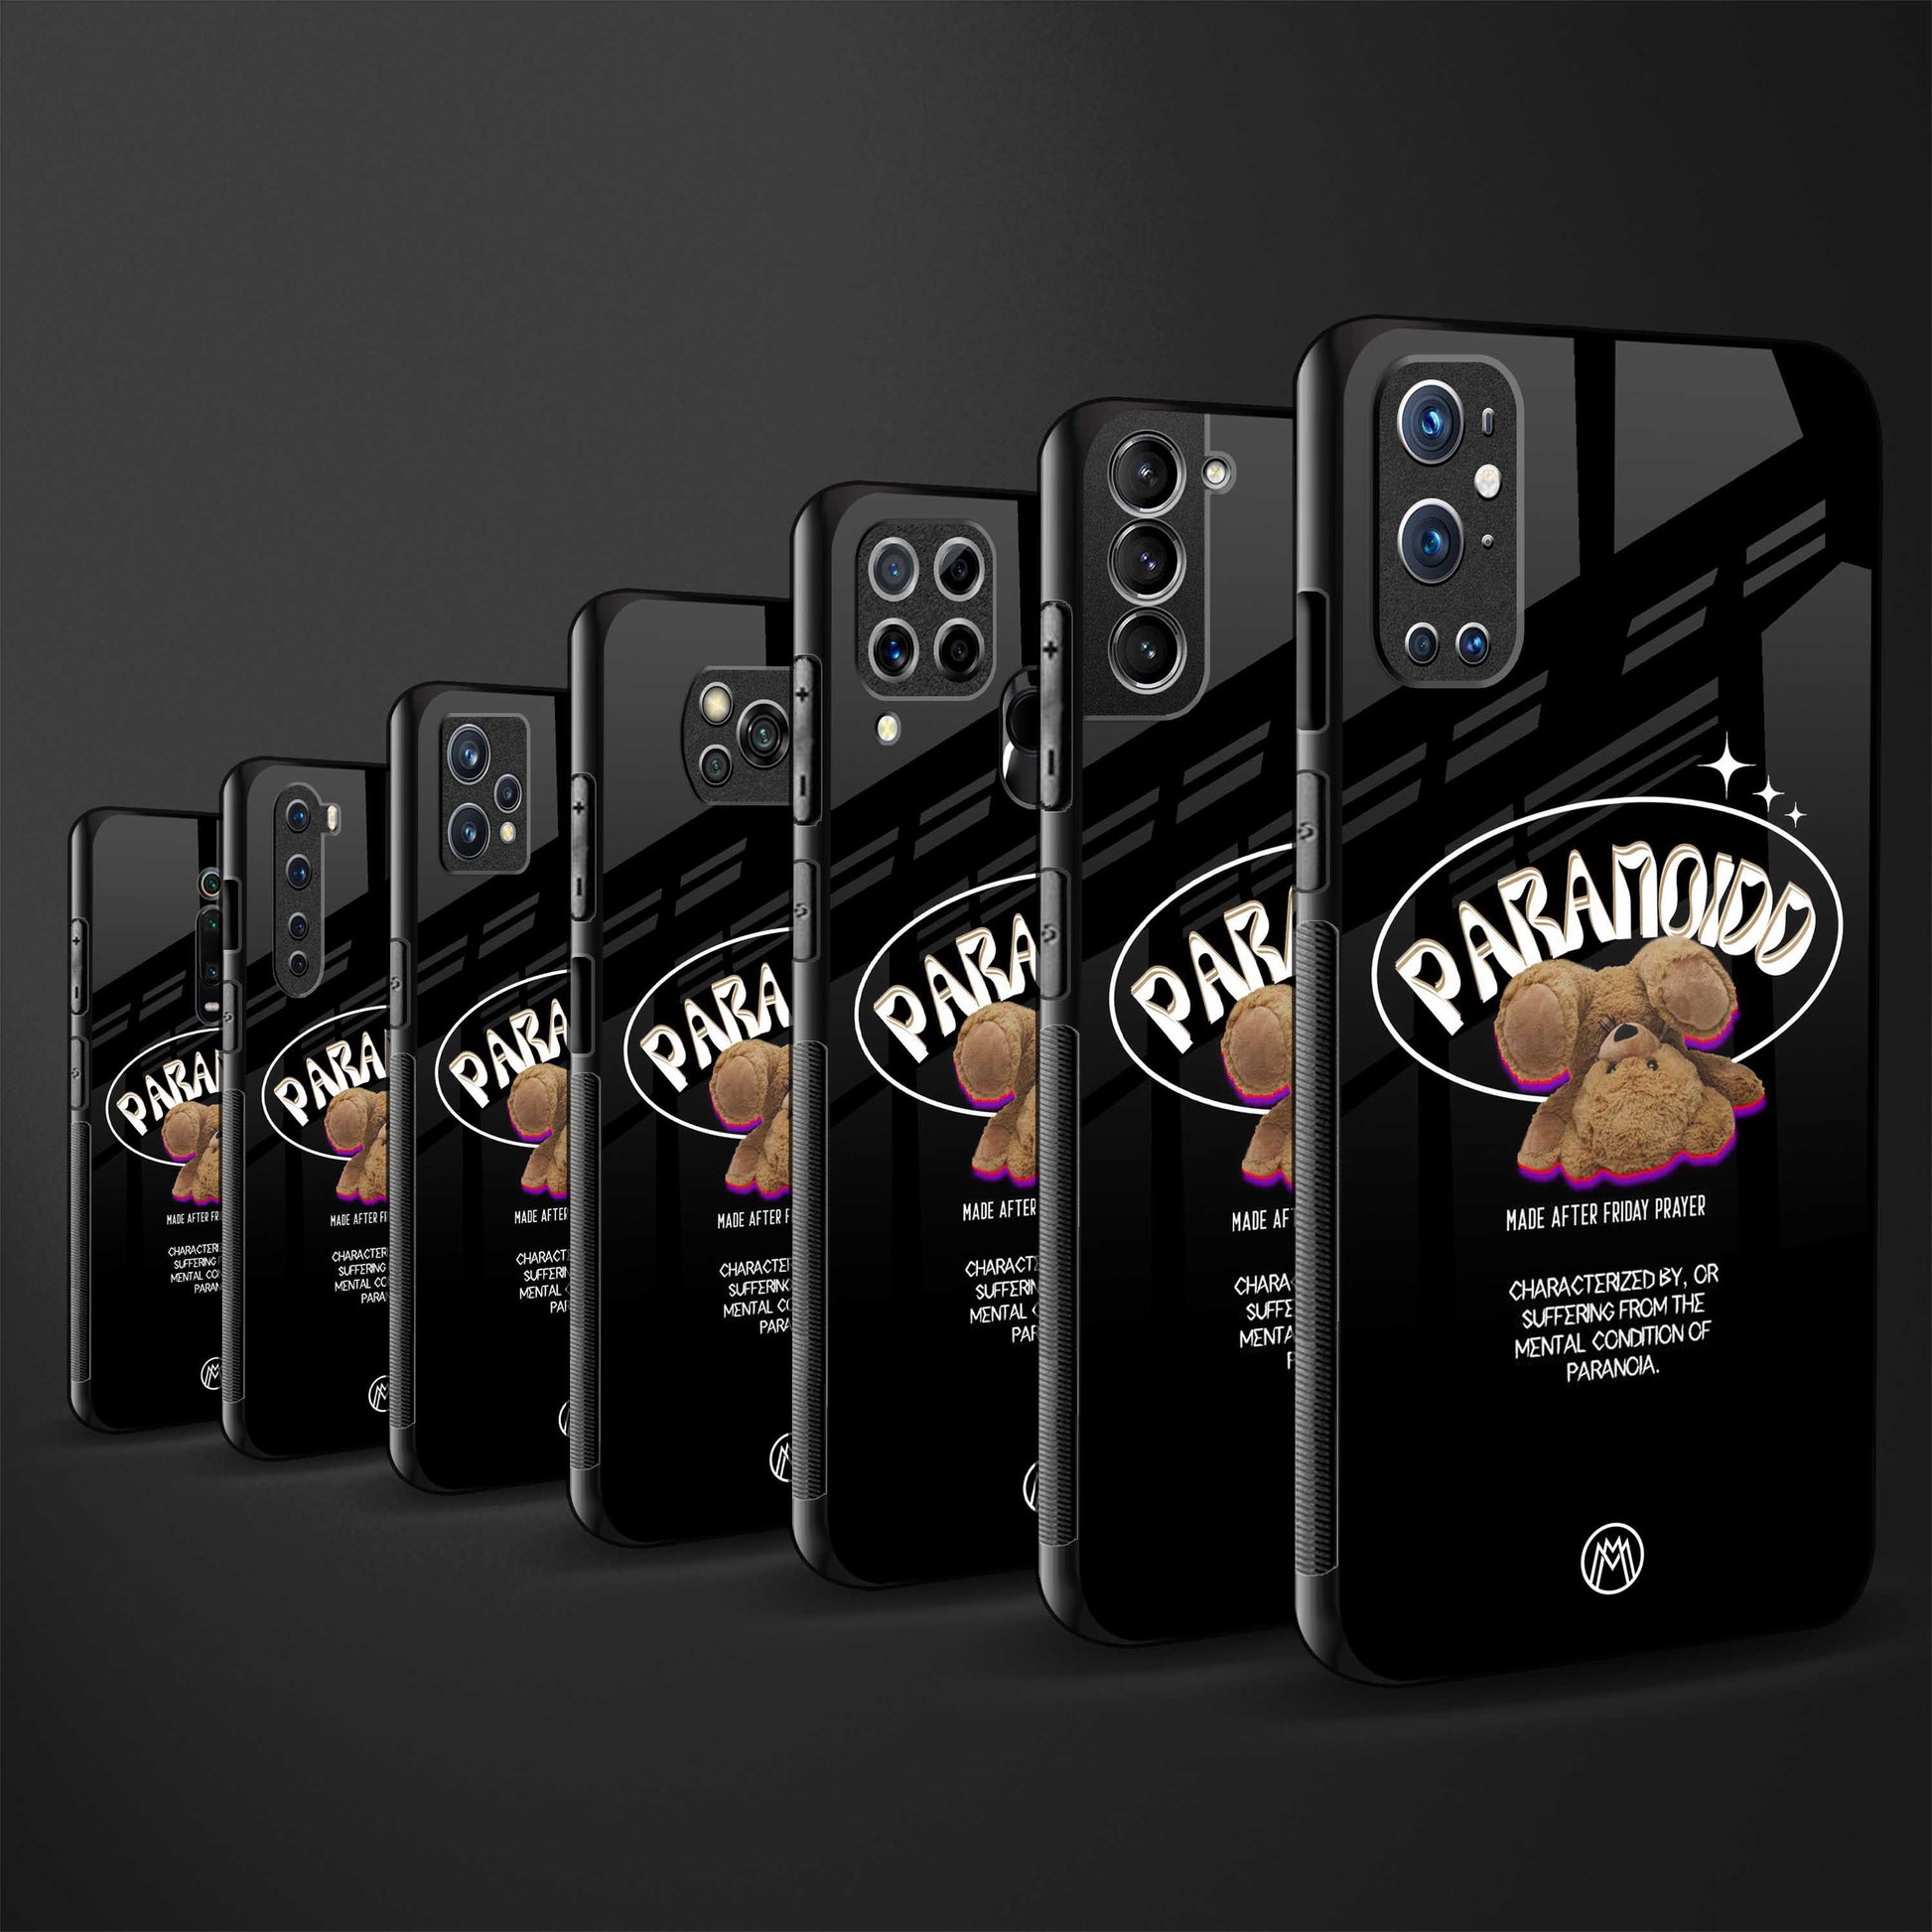 paranoid back phone cover | glass case for samsung galaxy a33 5g